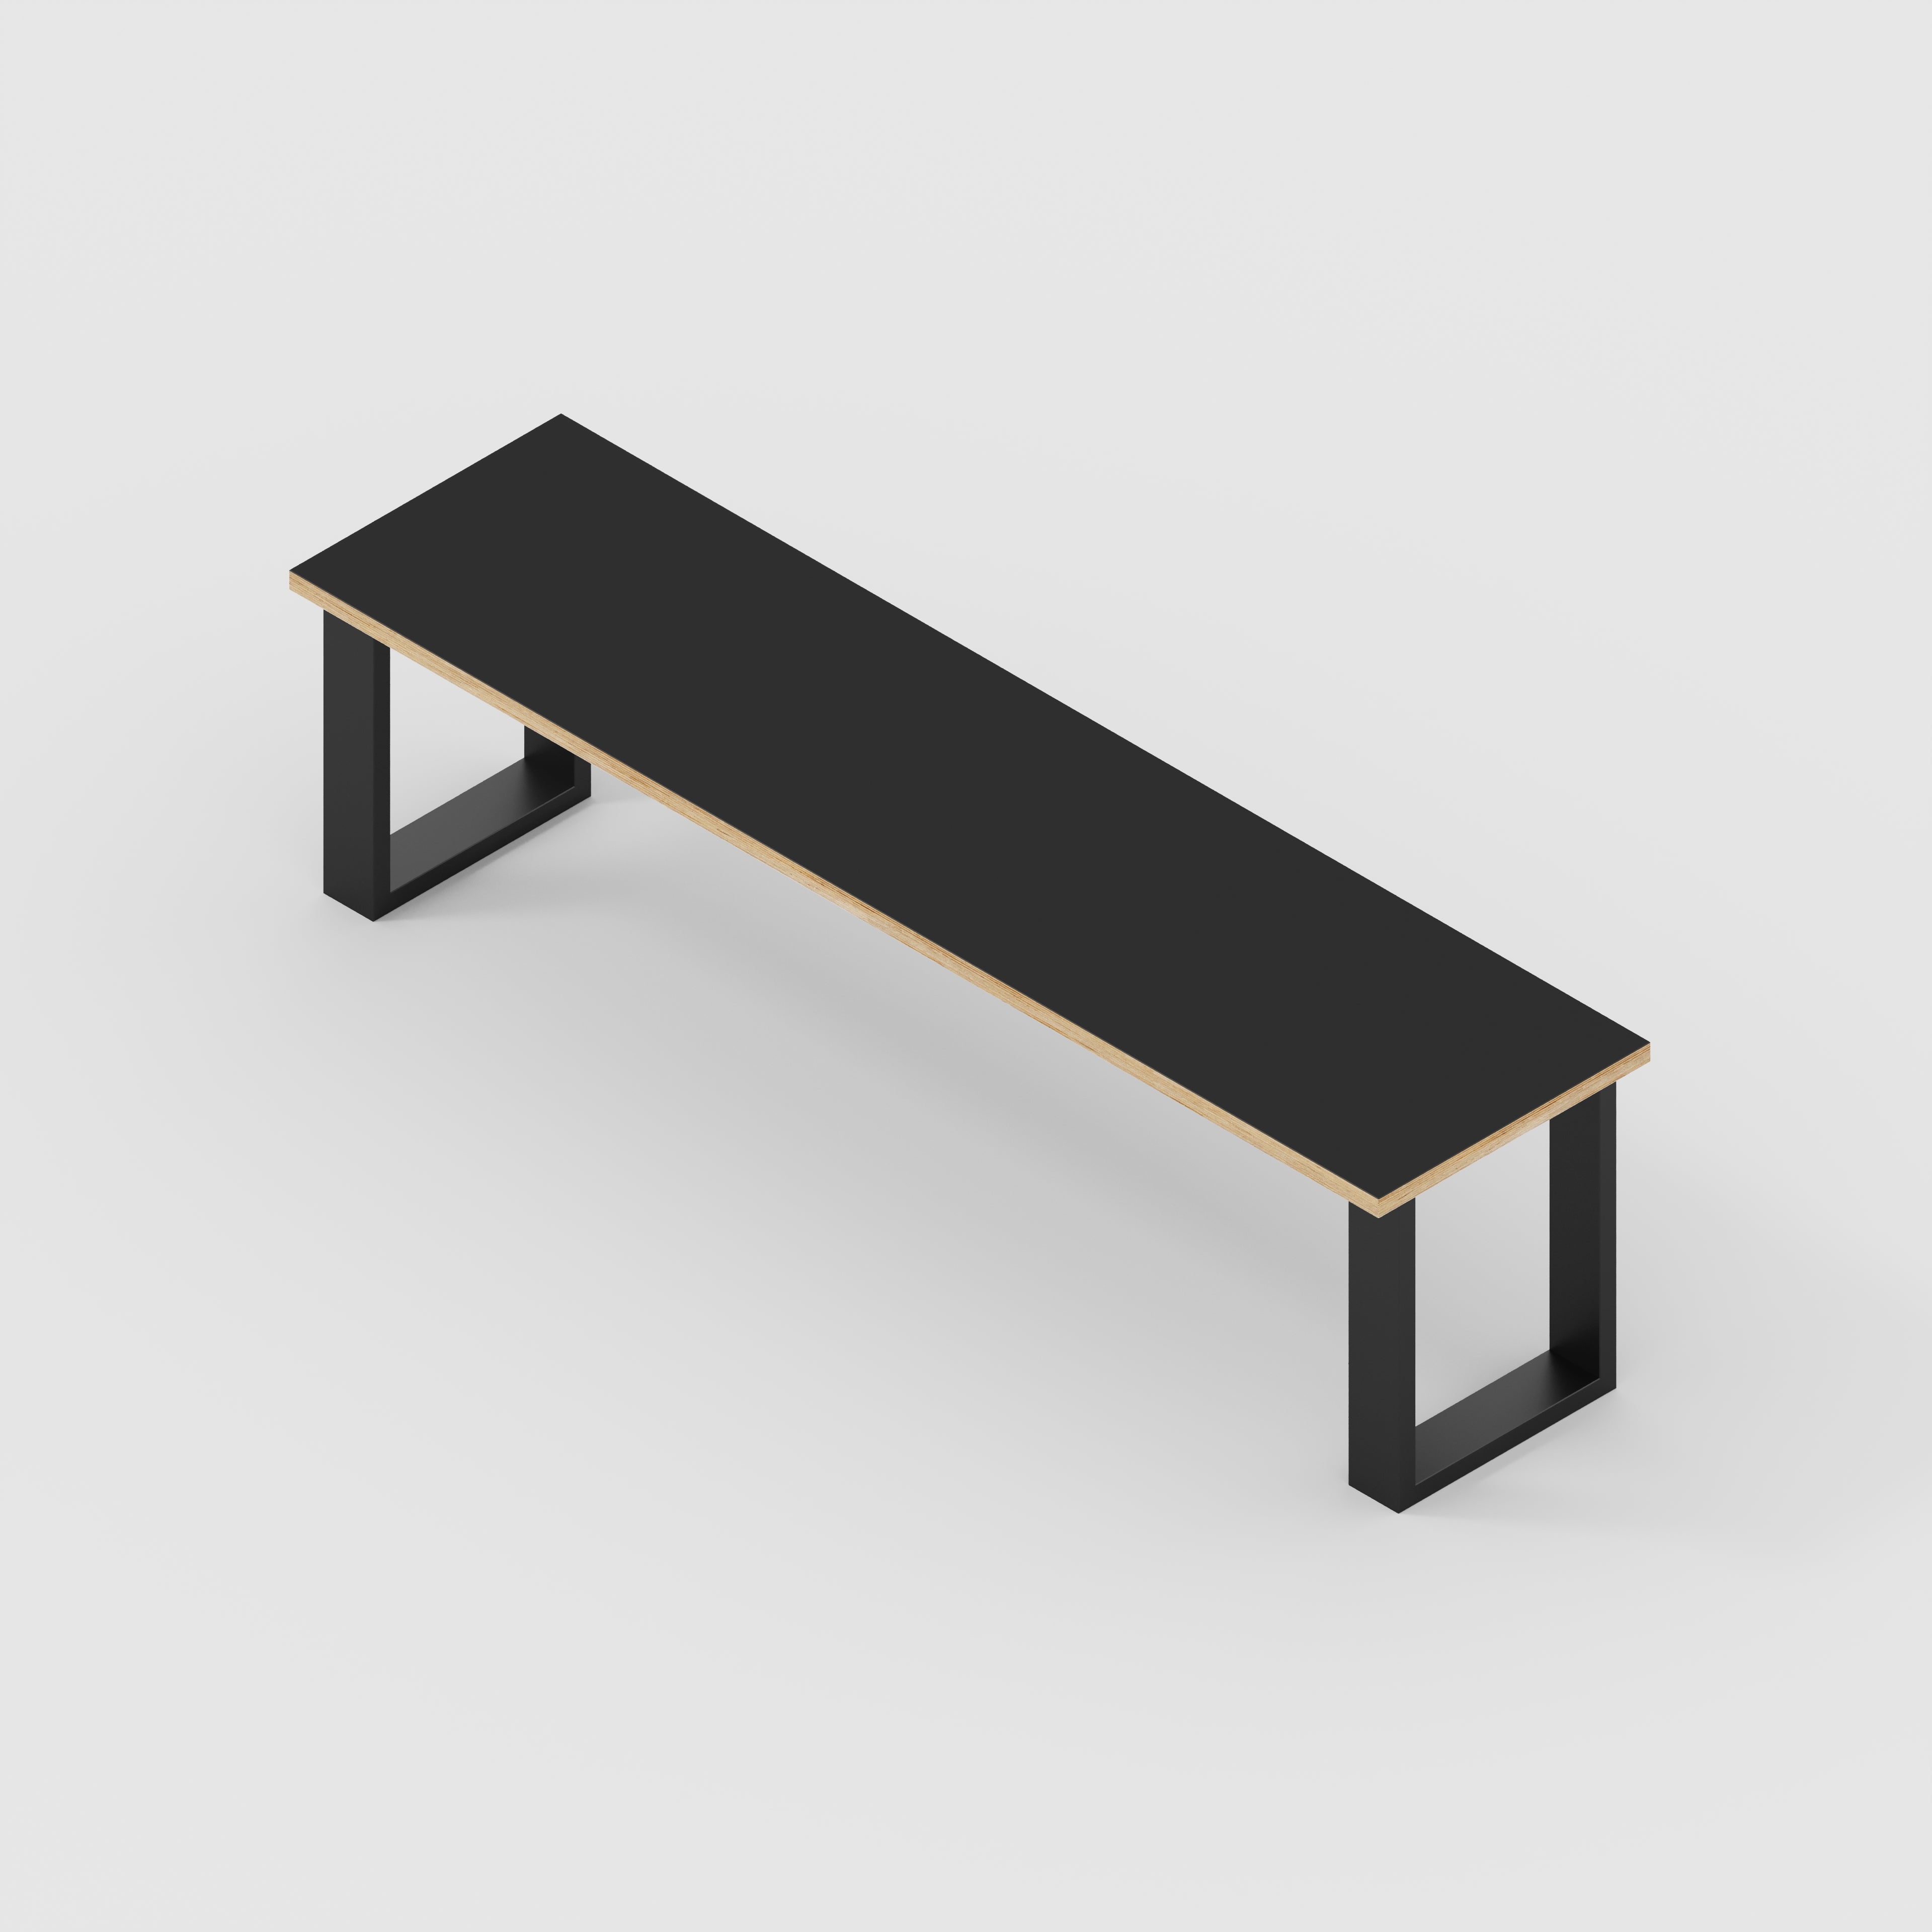 Bench Seat with Black Industrial Legs - Formica Diamond Black - 1600(w) x 400(d)